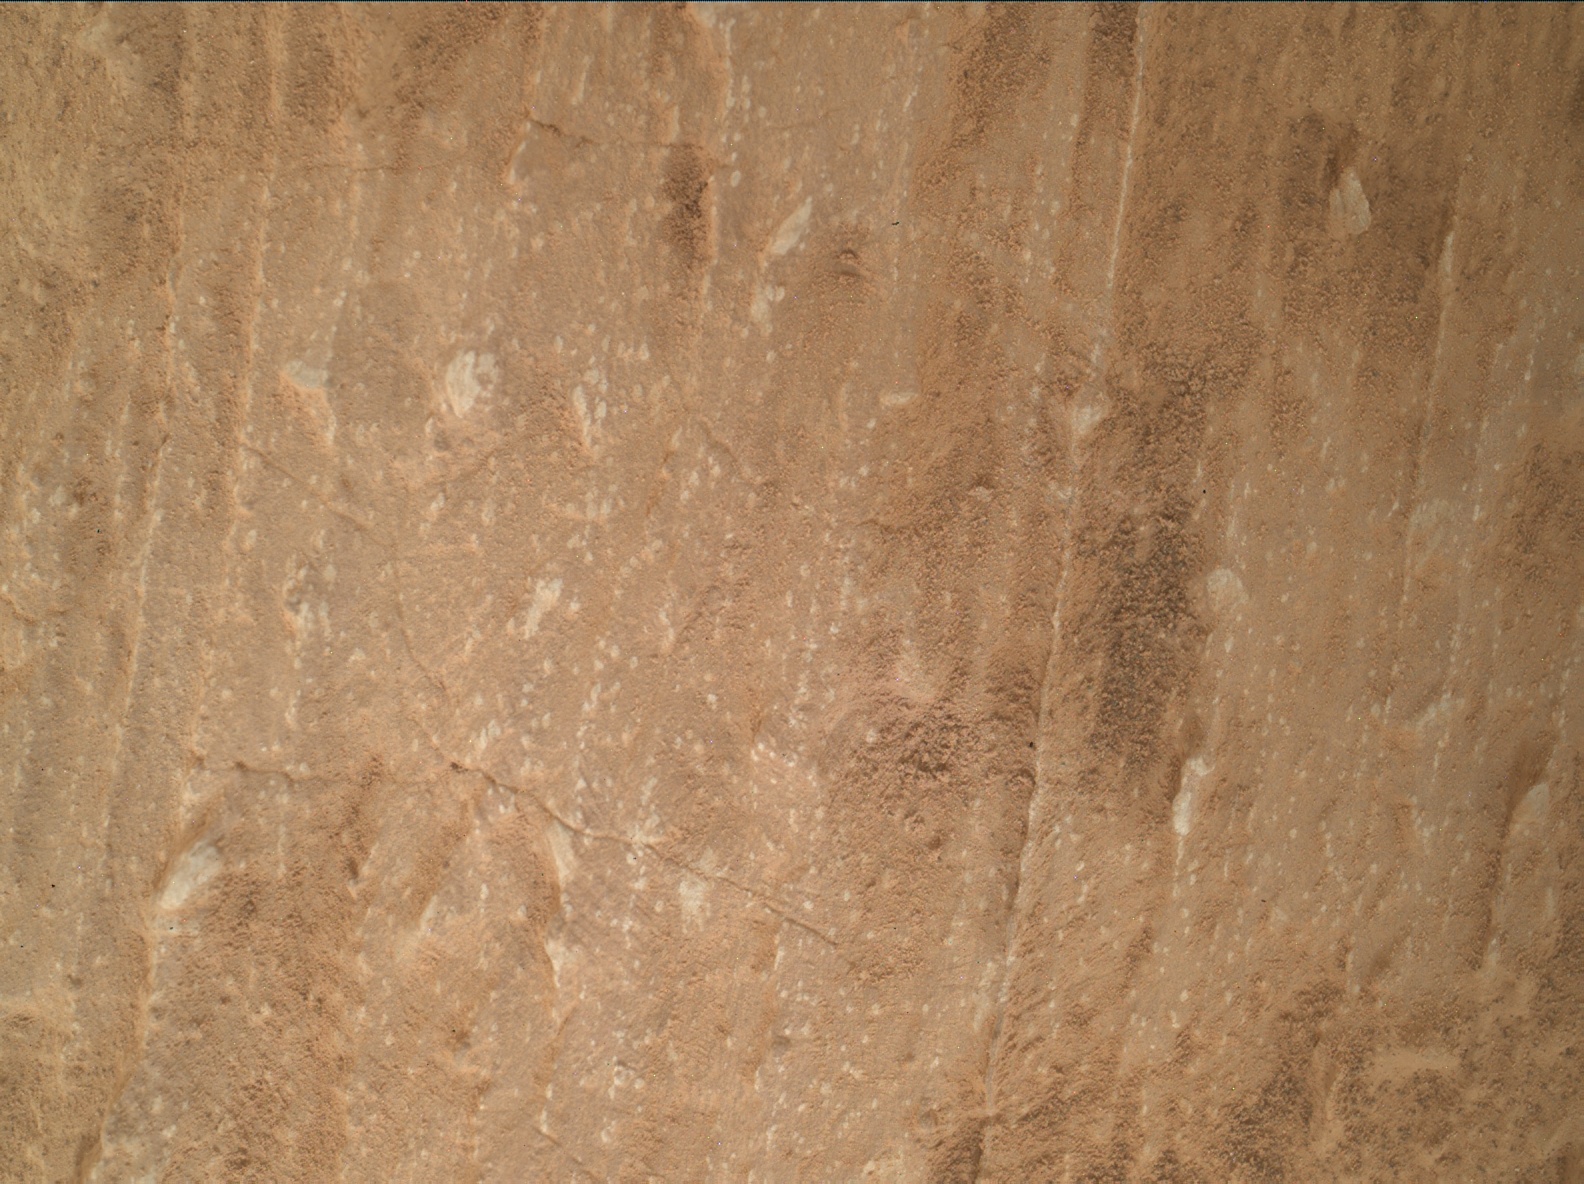 Nasa's Mars rover Curiosity acquired this image using its Mars Hand Lens Imager (MAHLI) on Sol 3866